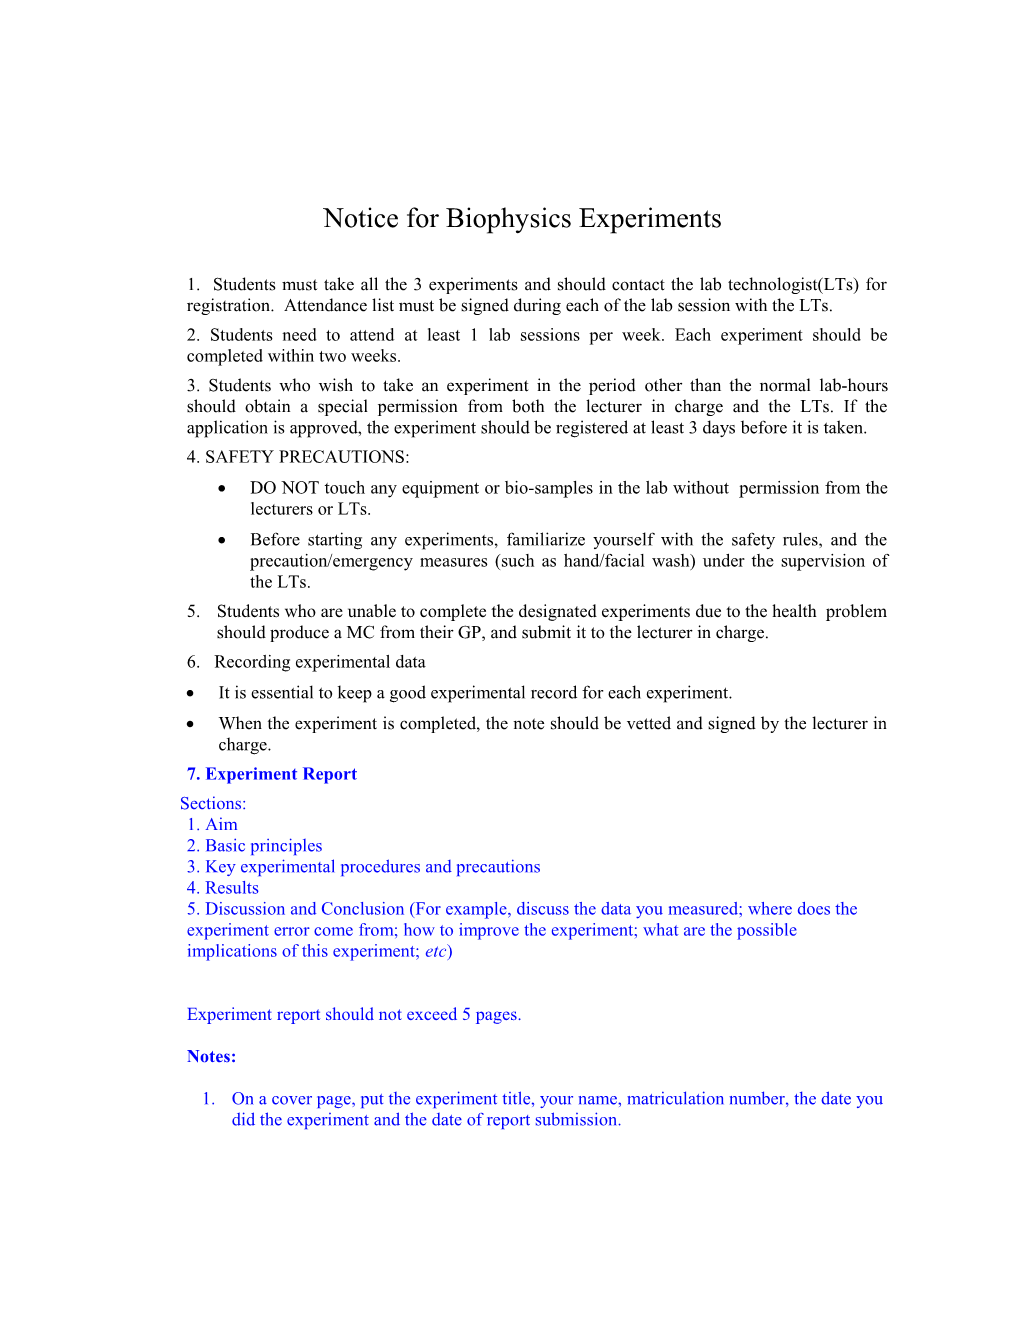 Notice for Biophysics Experiments